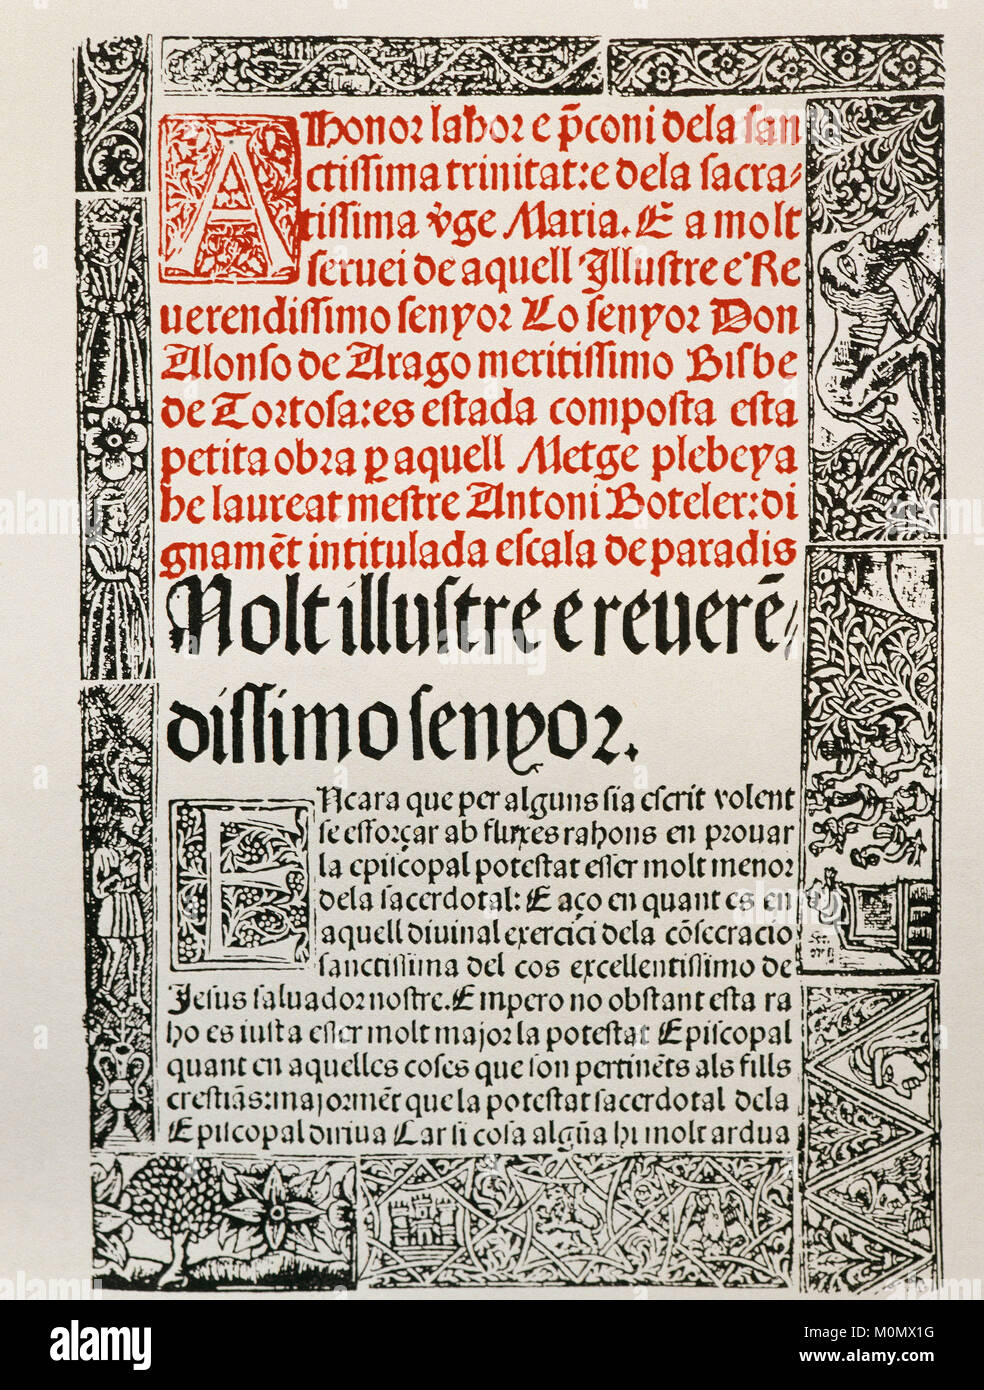 Catalan Literature. 15th century. Antoni Boteler or Boteller. Writer and Catalan doctor, probably from Tortosa. 'Escala de Paradis'. Ascetic work. Cover. Edition in Barcelona by Juan Rosemback in 1495. Incunabula. Engraving. Stock Photo